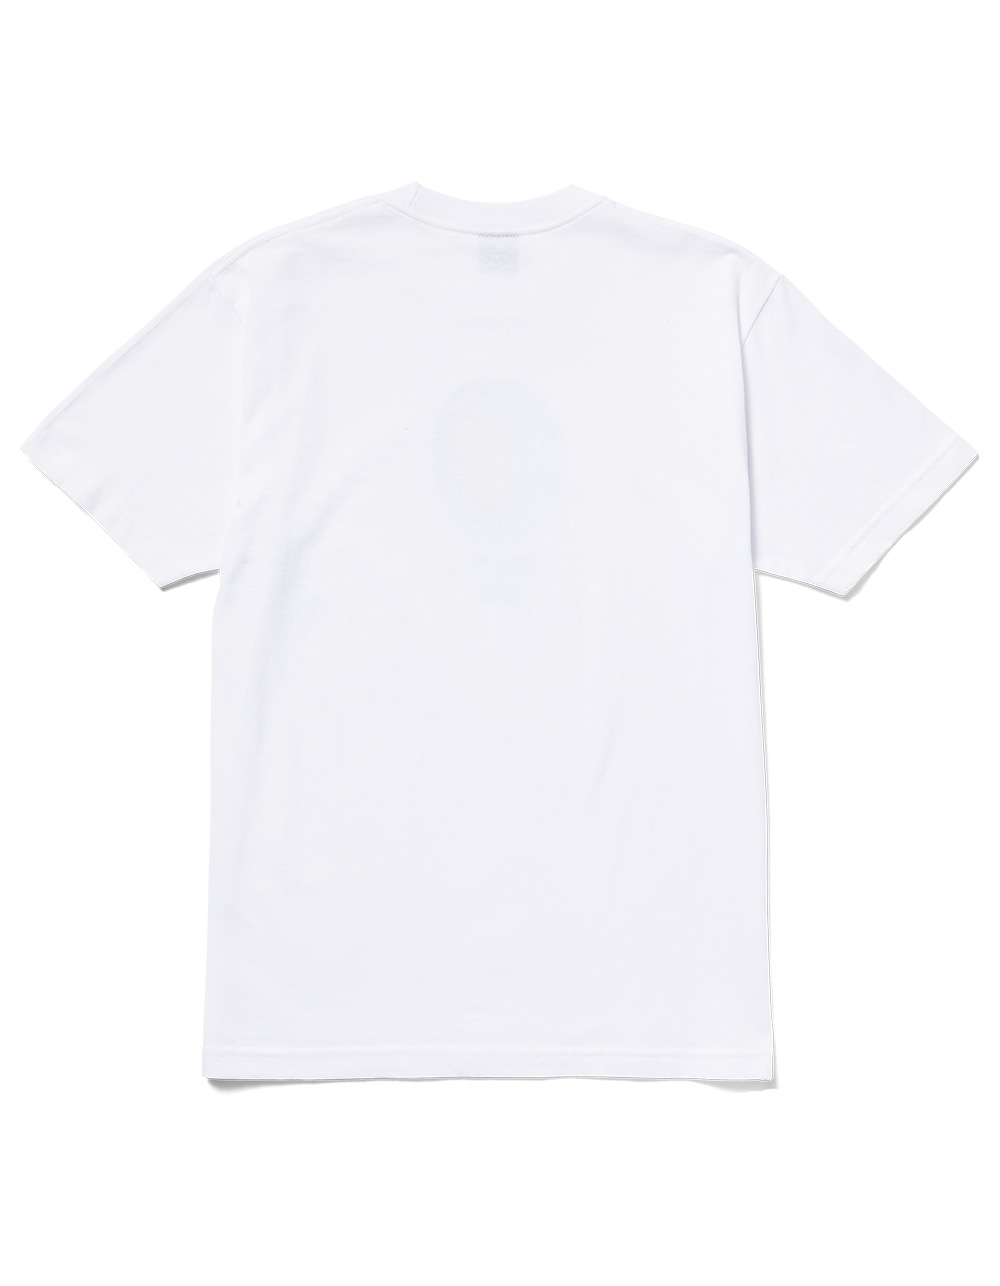 HUF x Goodyear The Greatest Mens Tee - WHITE | Tillys